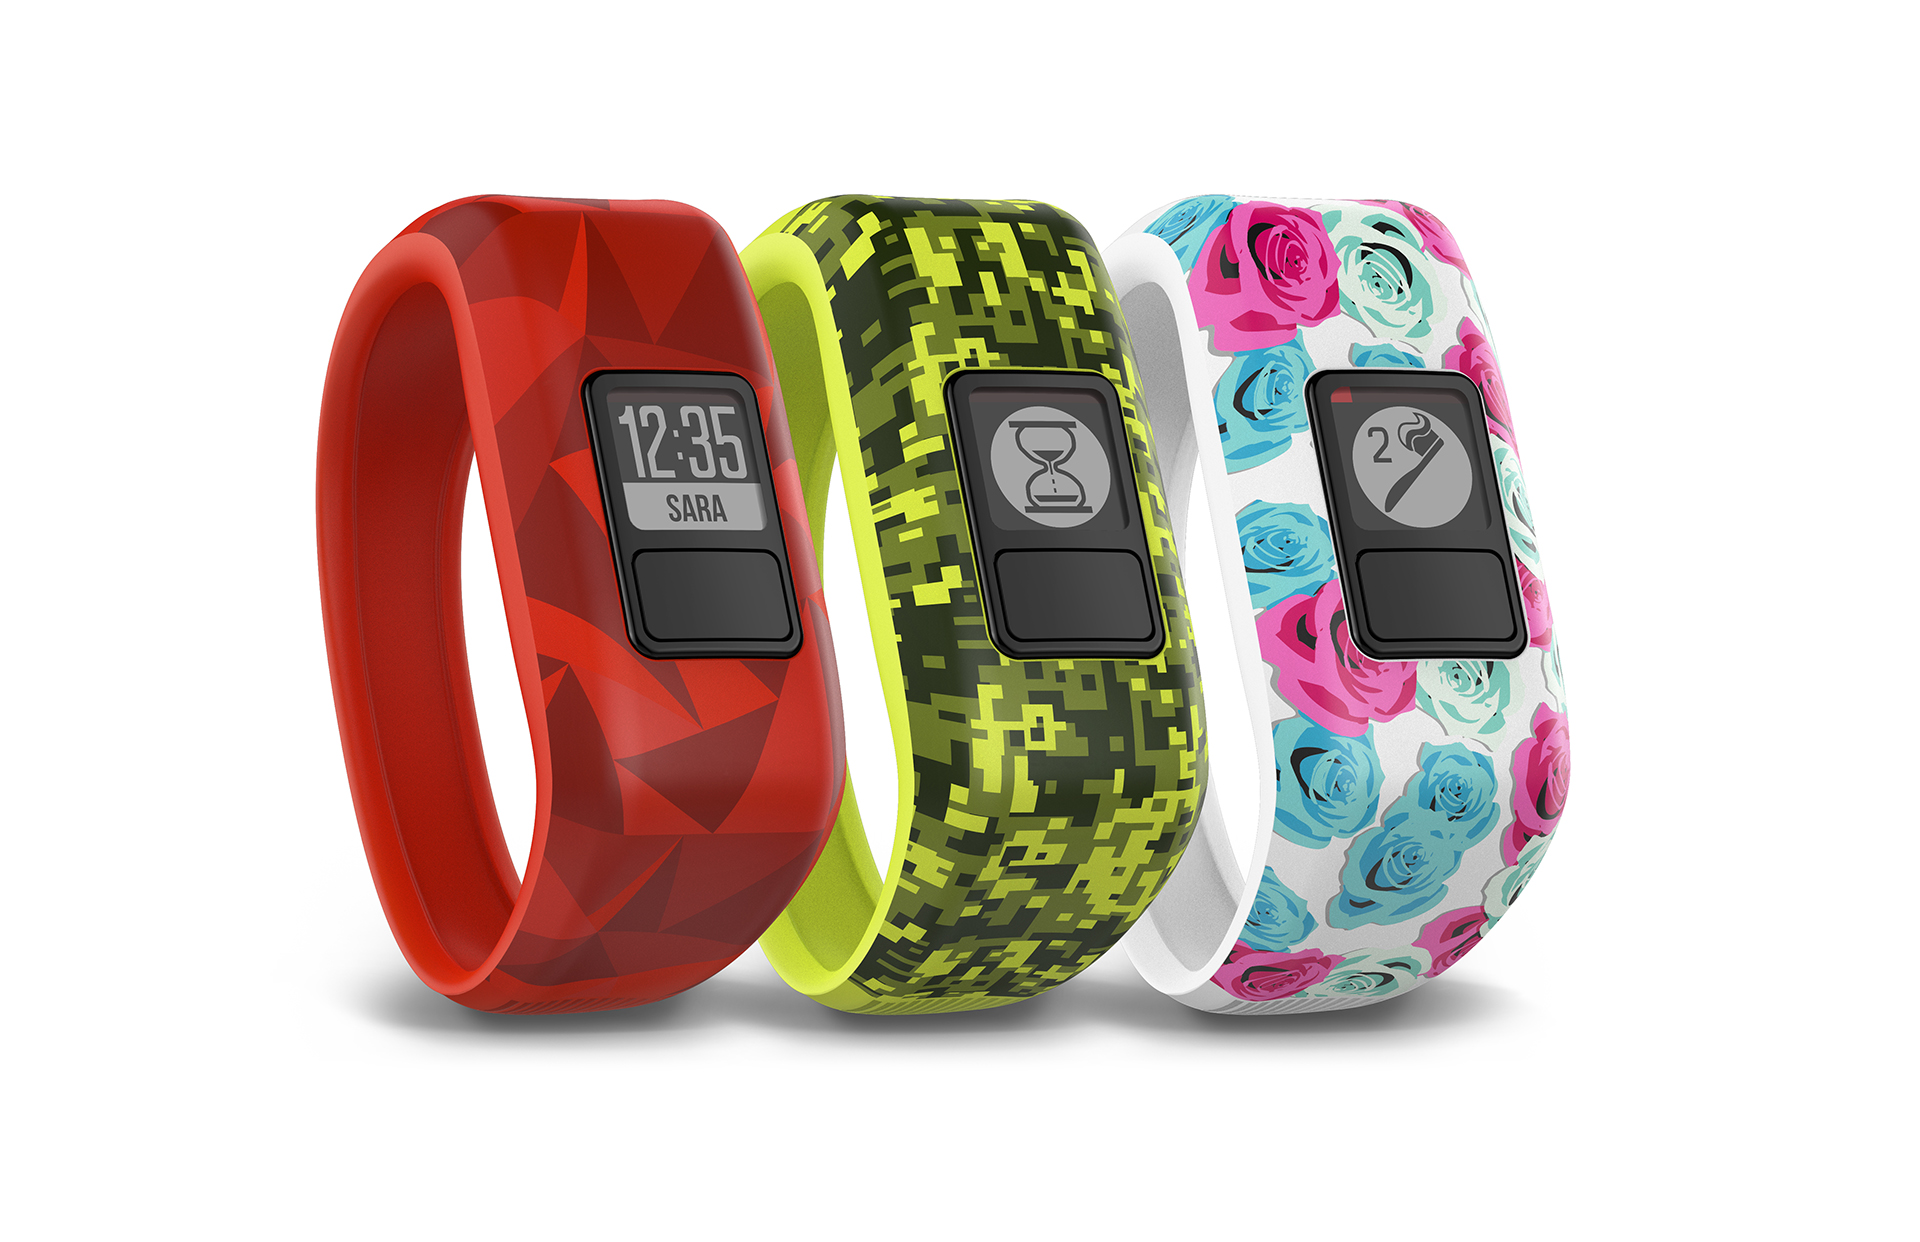 Garmin wants your kids to get the couch with its $80 Jr tracker | Ars Technica